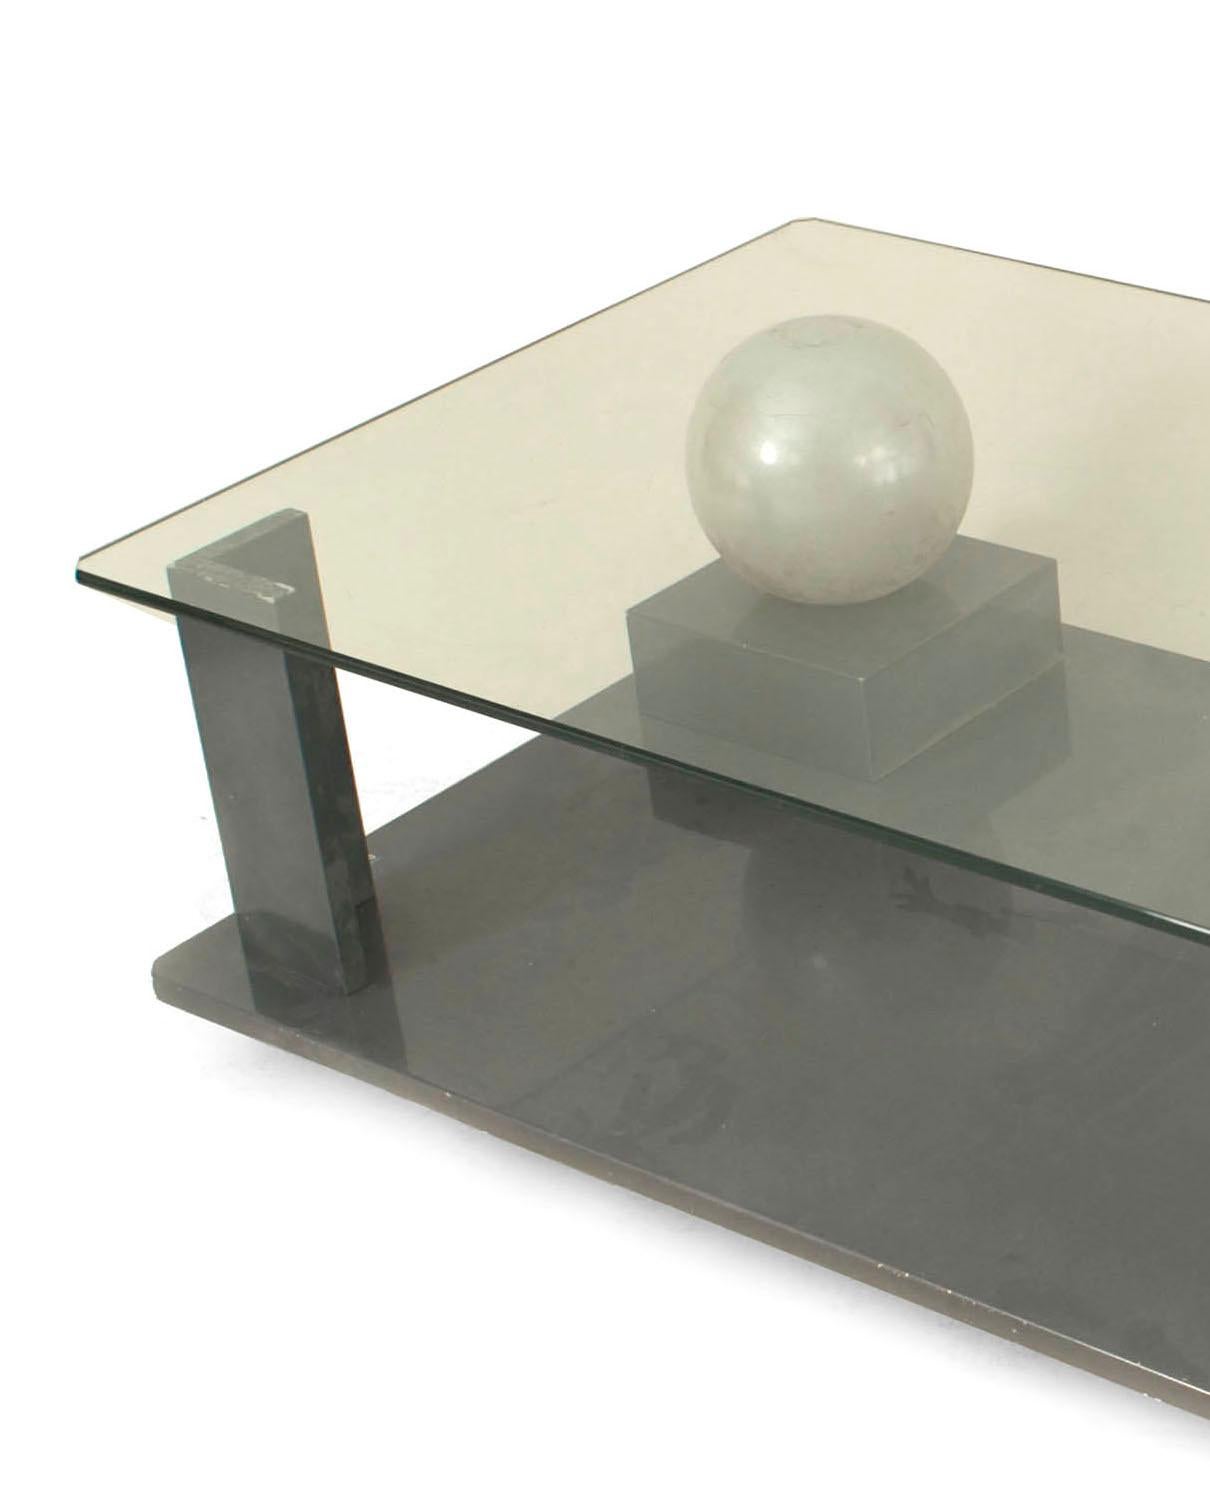 French Mid-Century Modern (1950s) coffee table with a geometric base with two spheres, a lacquered black and gray finish, and a rectangular glass top. (signed with signature etched: CARDIN)
